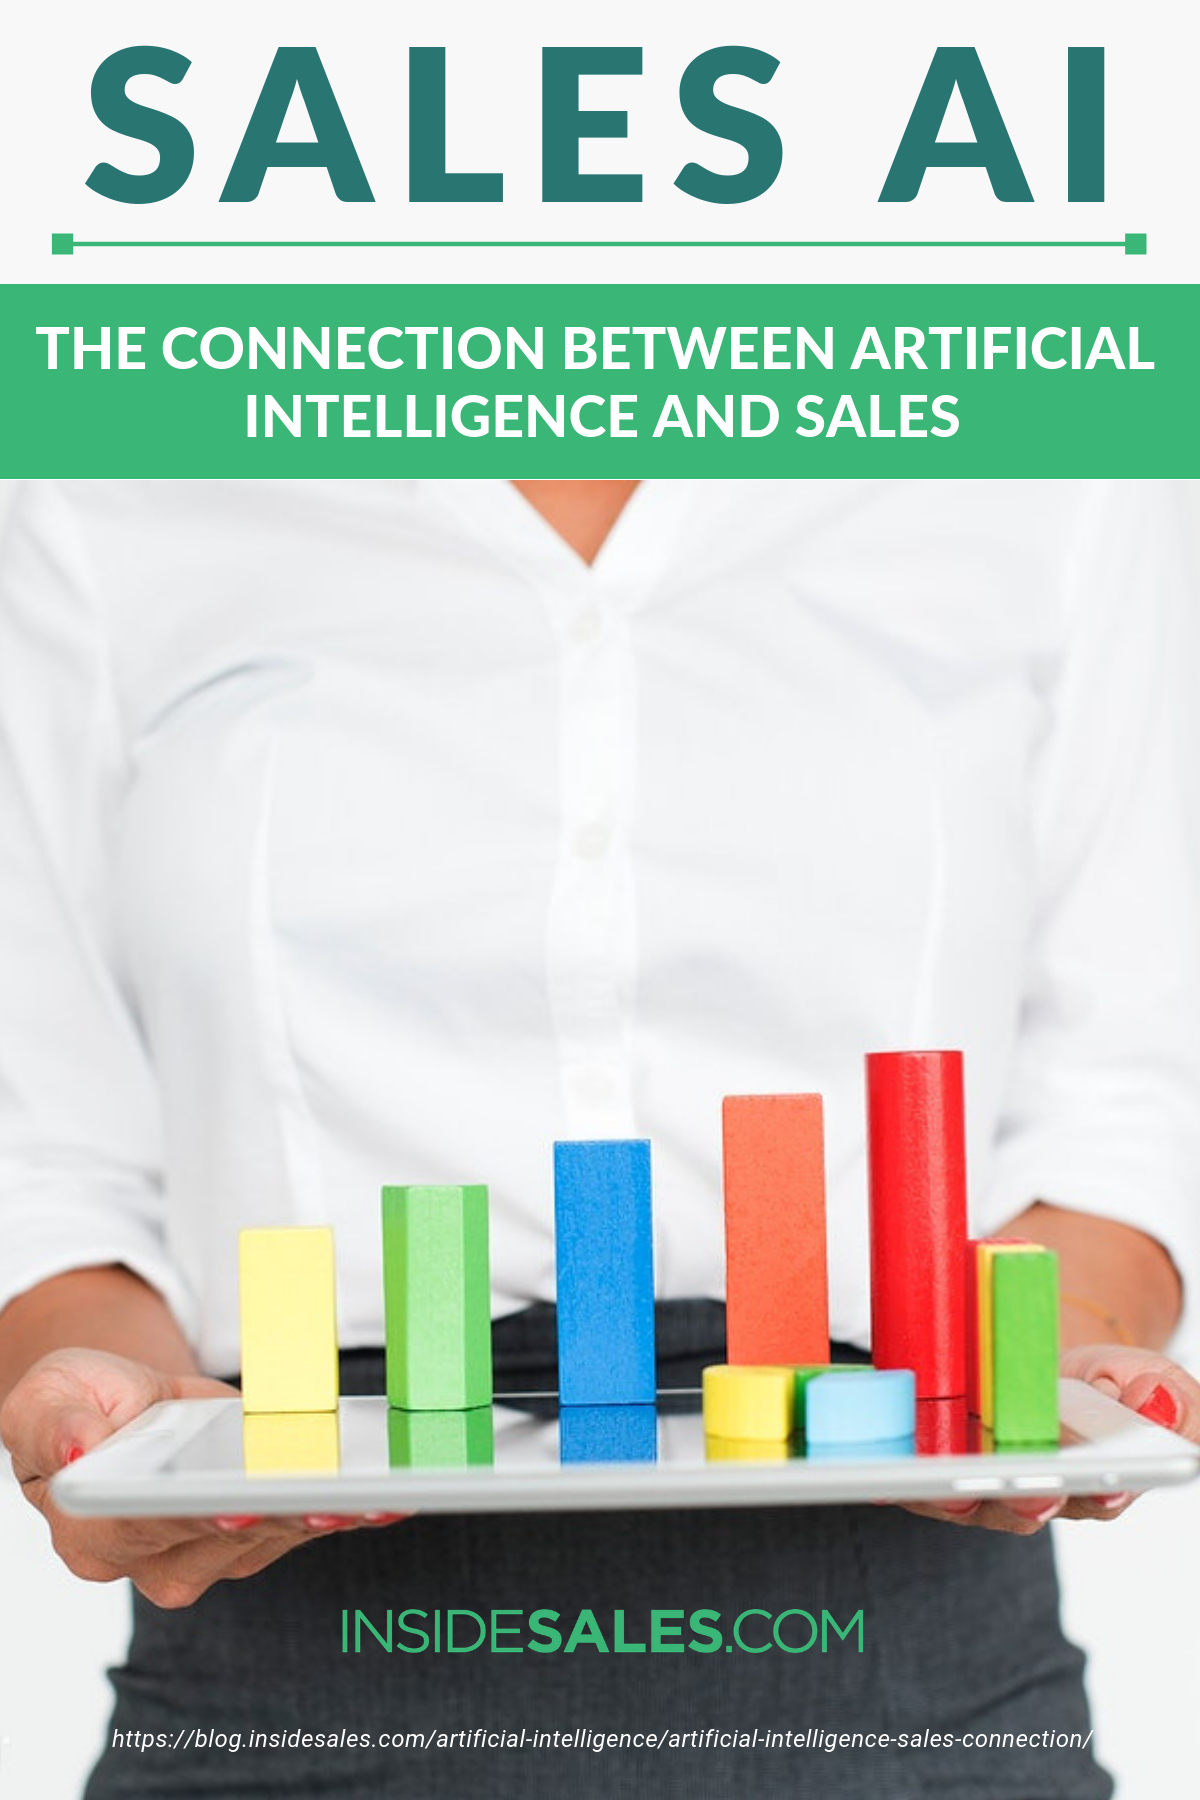 Sales AI: The Connection Between Artificial Intelligence and Sales https://resources.insidesales.com/blog/artificial-intelligence/artificial-intelligence-sales-connection/